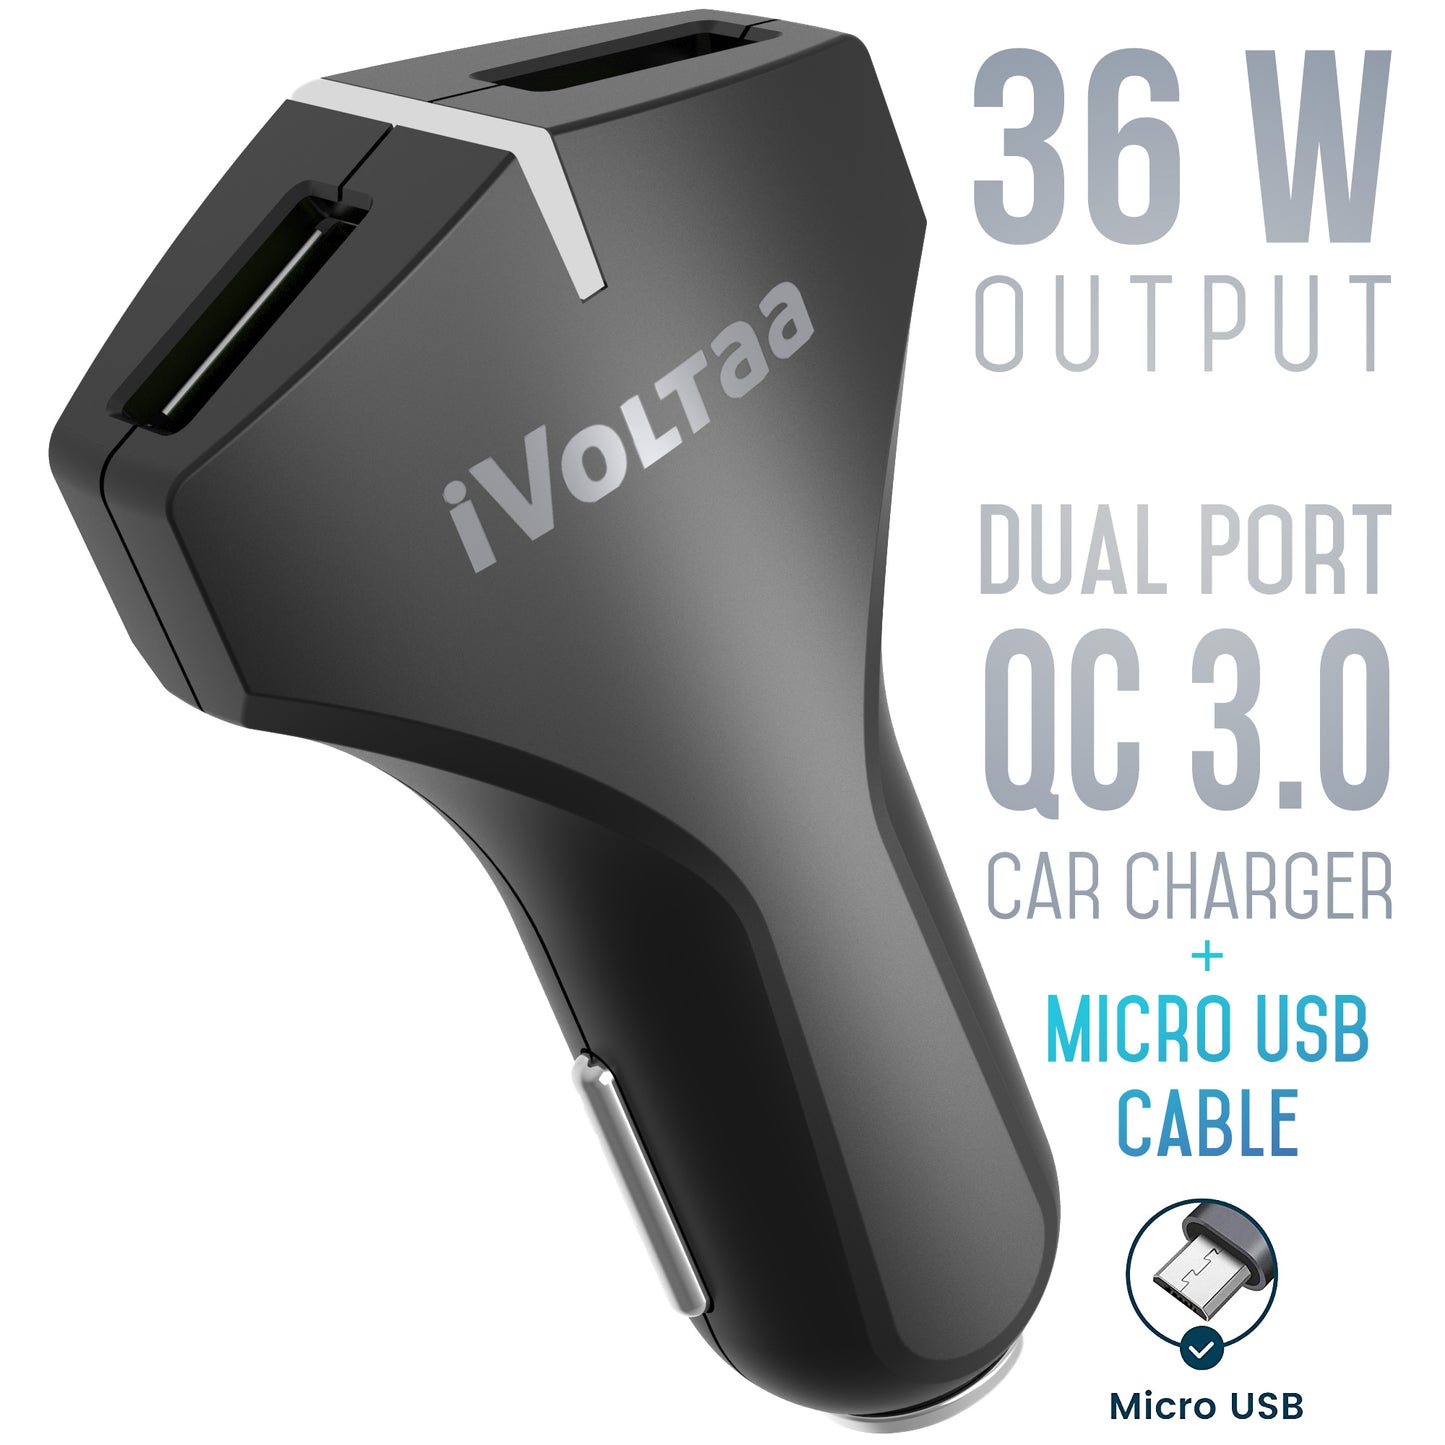 iVoltaa QC 3.0 Dual Port 36 W Turbo Car Charger with Type C Cable (Black)